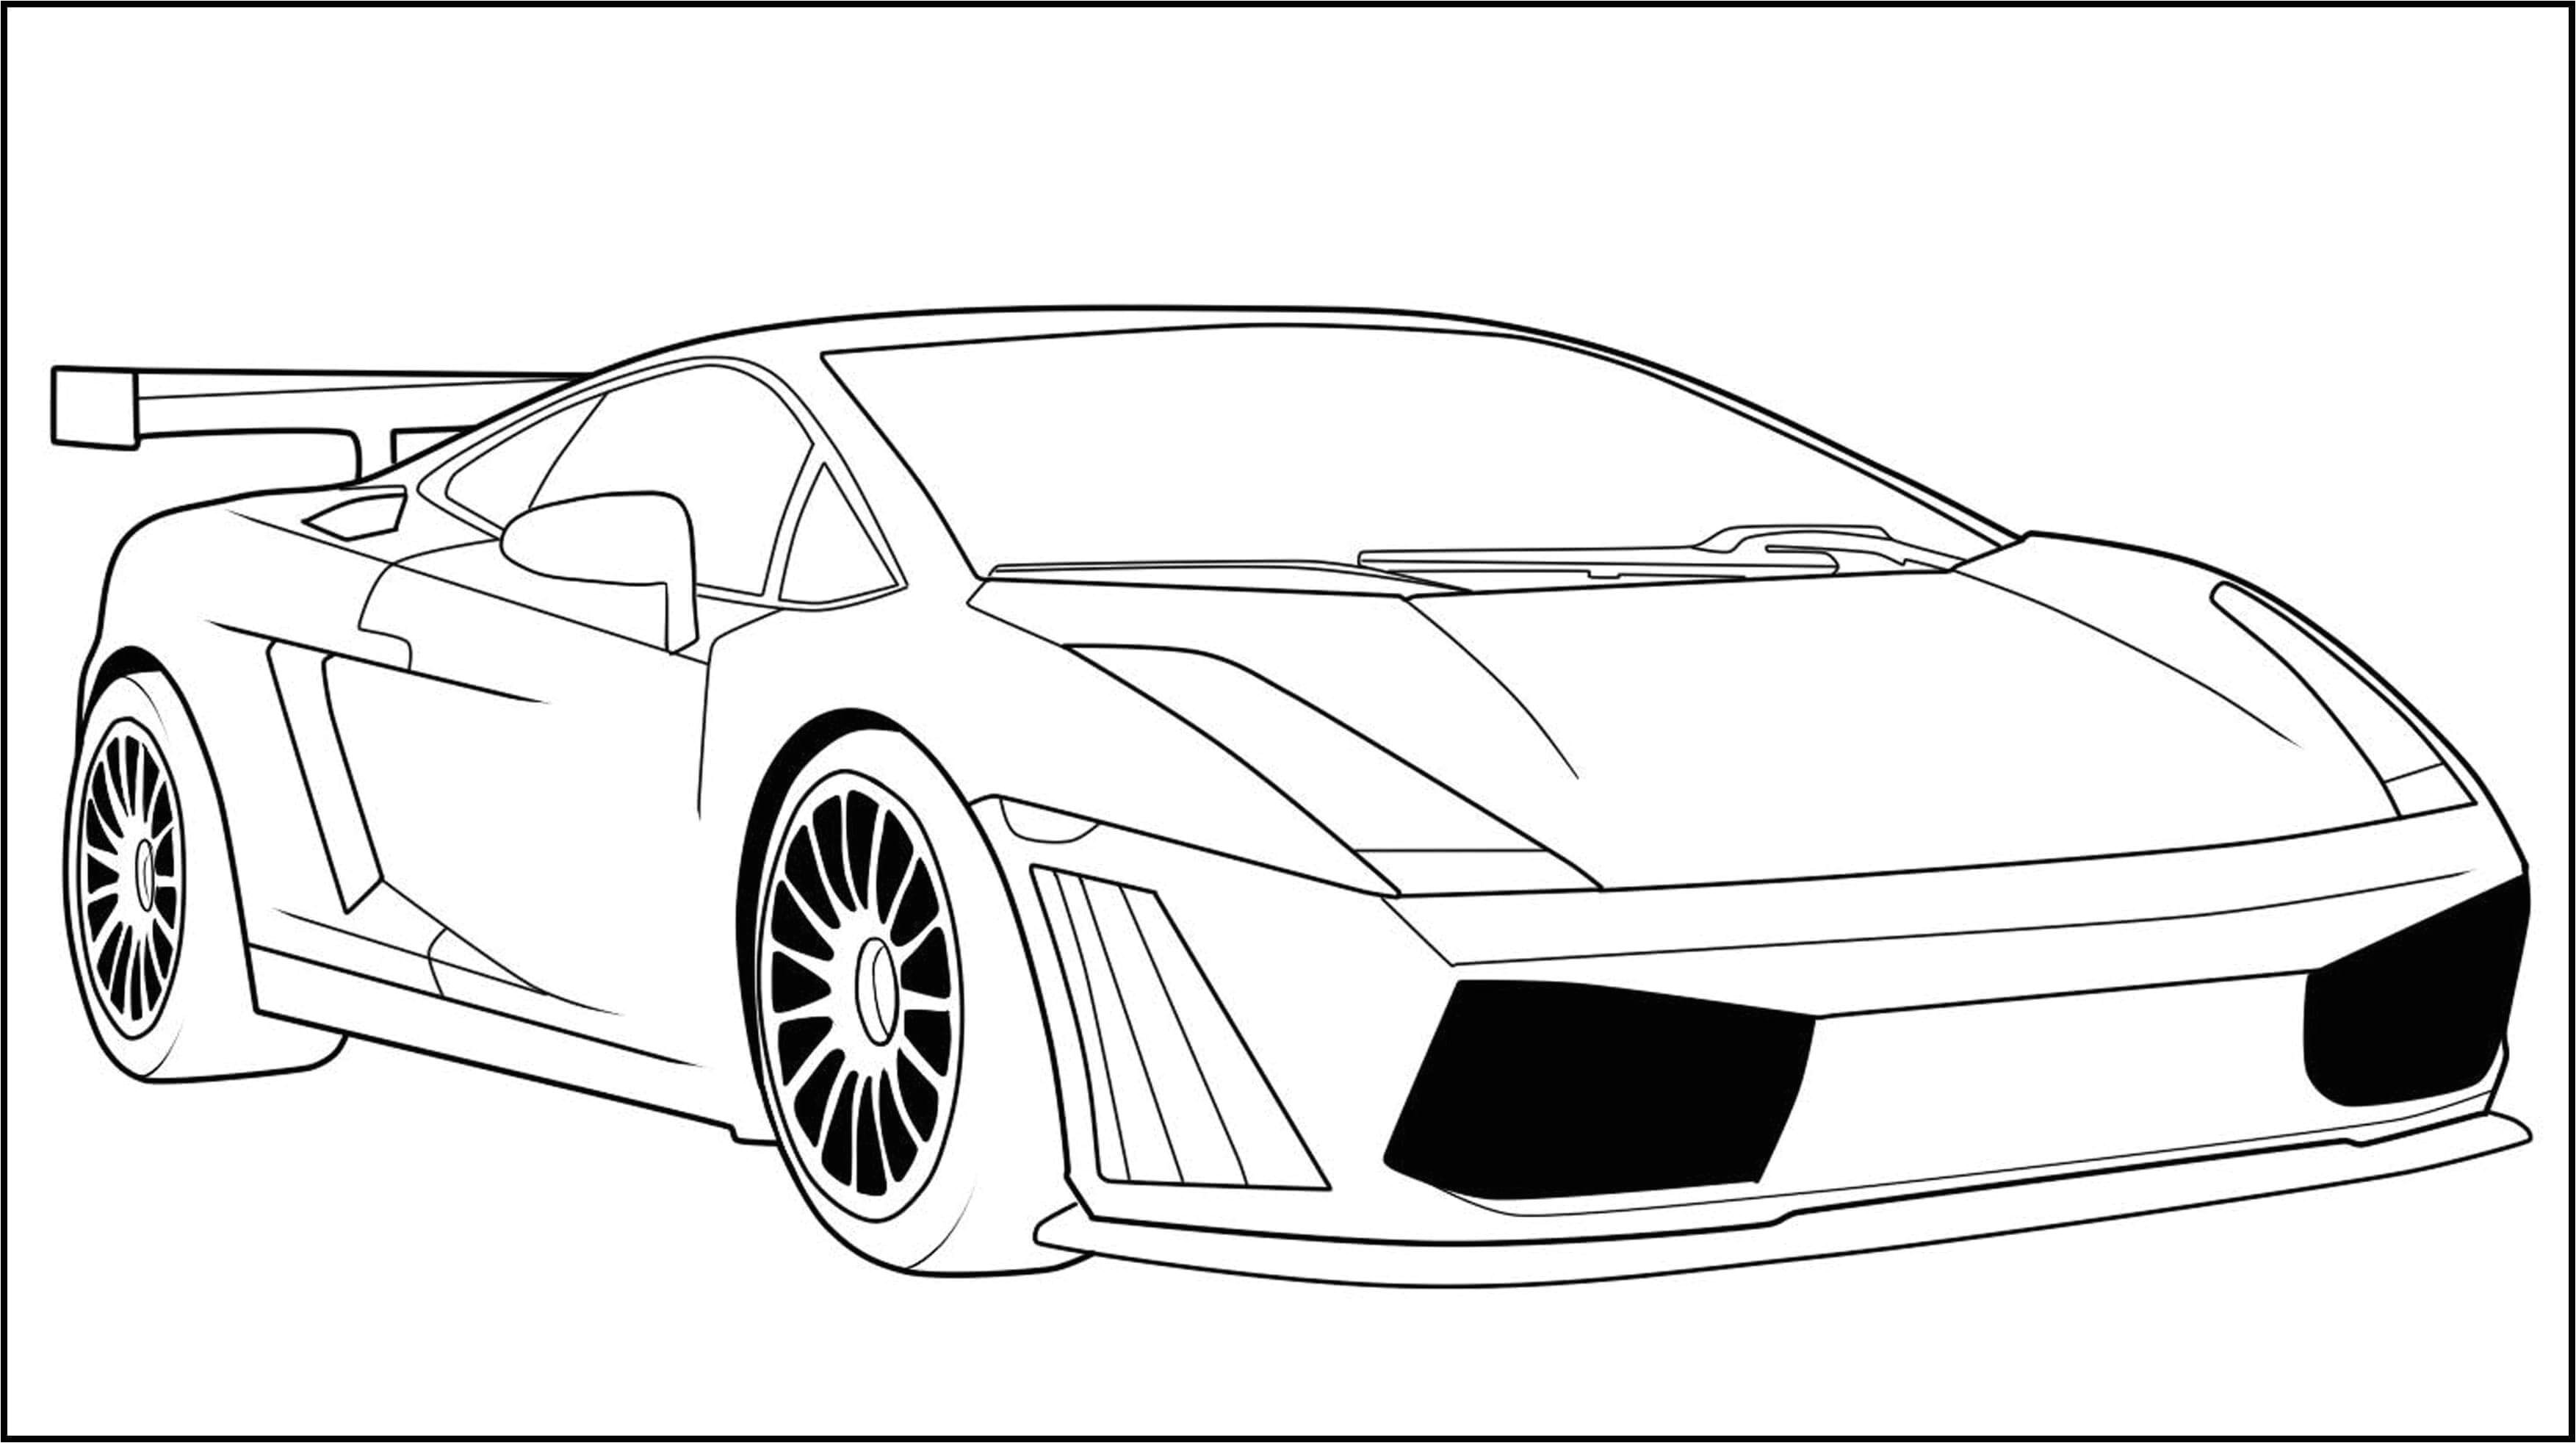 Well guys I have only two more submissions going up and they are both going to be on sports cars that are very popular